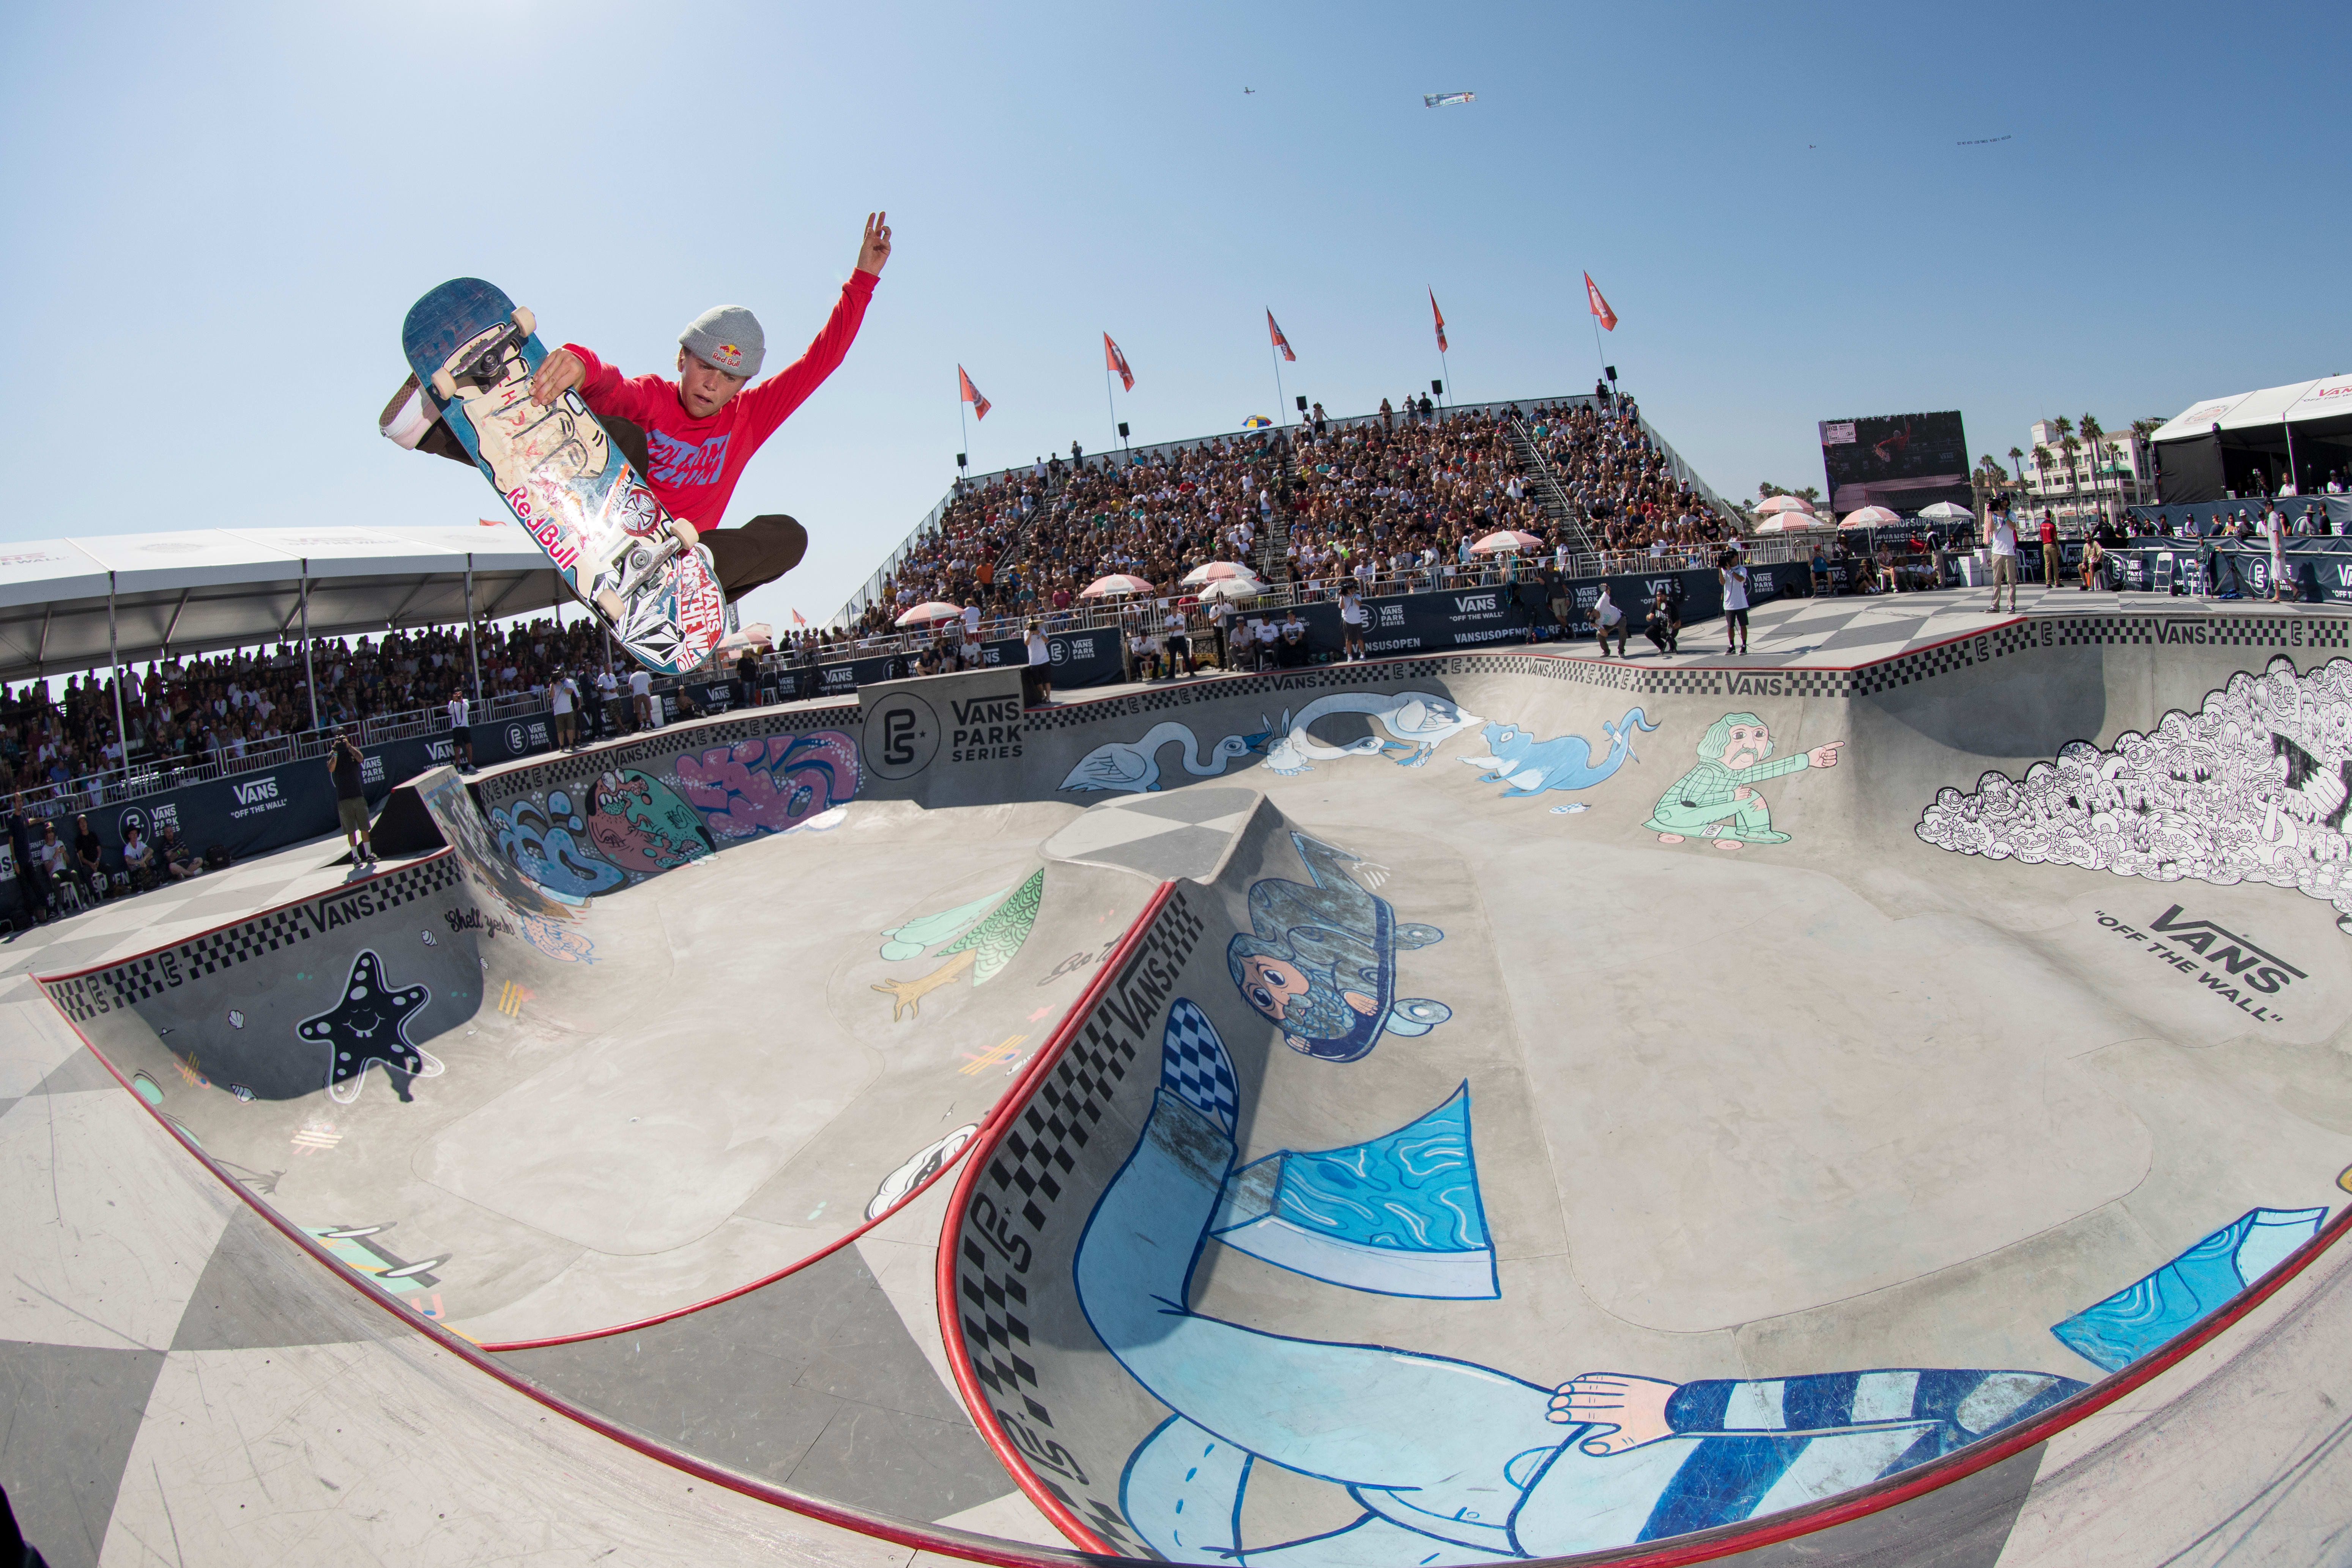 14 Skateboarding Competitions in the U.S.